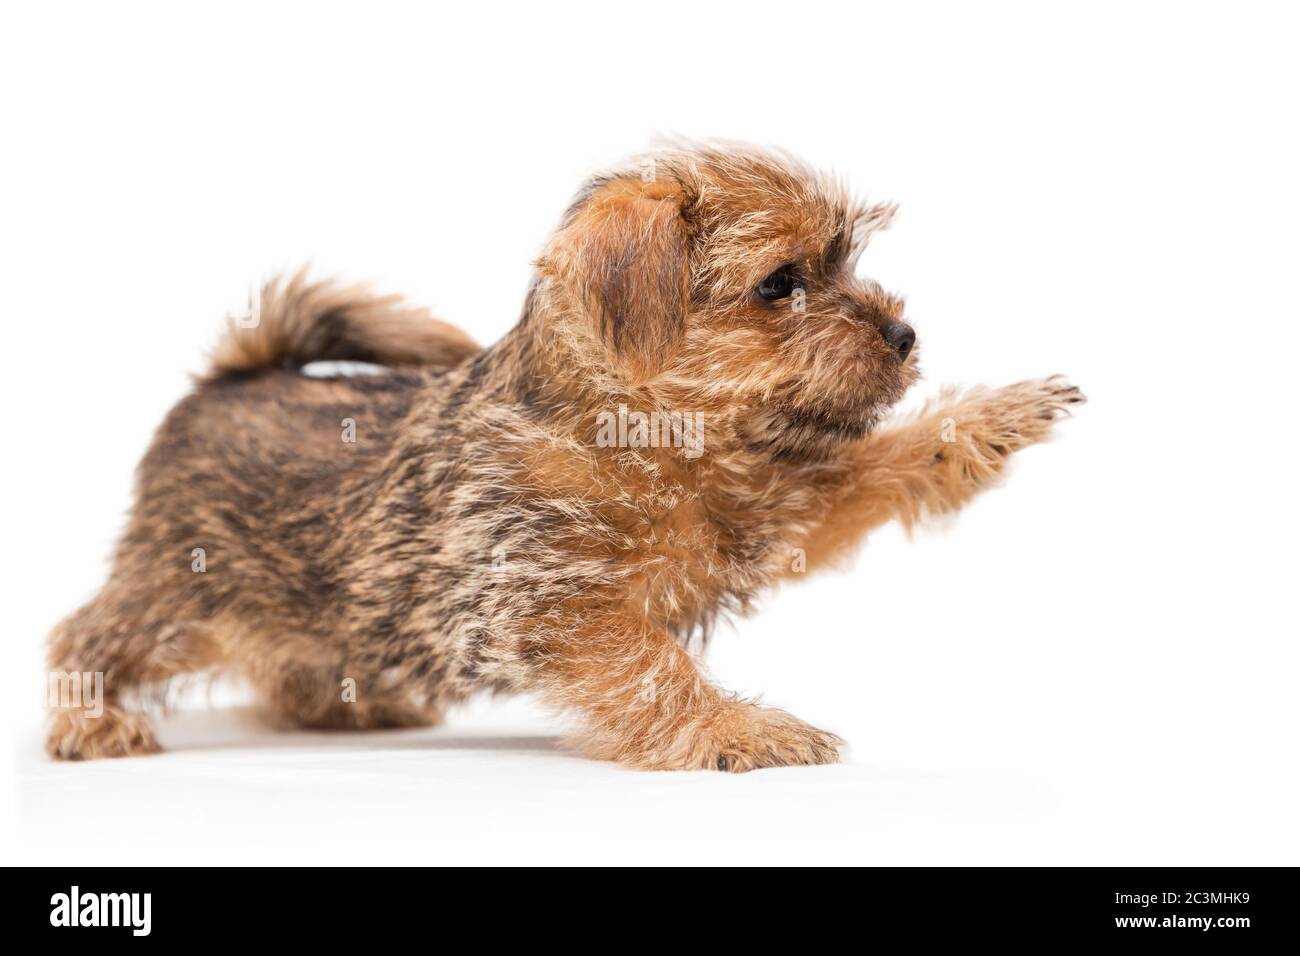 Little Cute Puppy Norfolk Terrier With Raised Paw Profile View Isolated On White Background Stock Photo Alamy